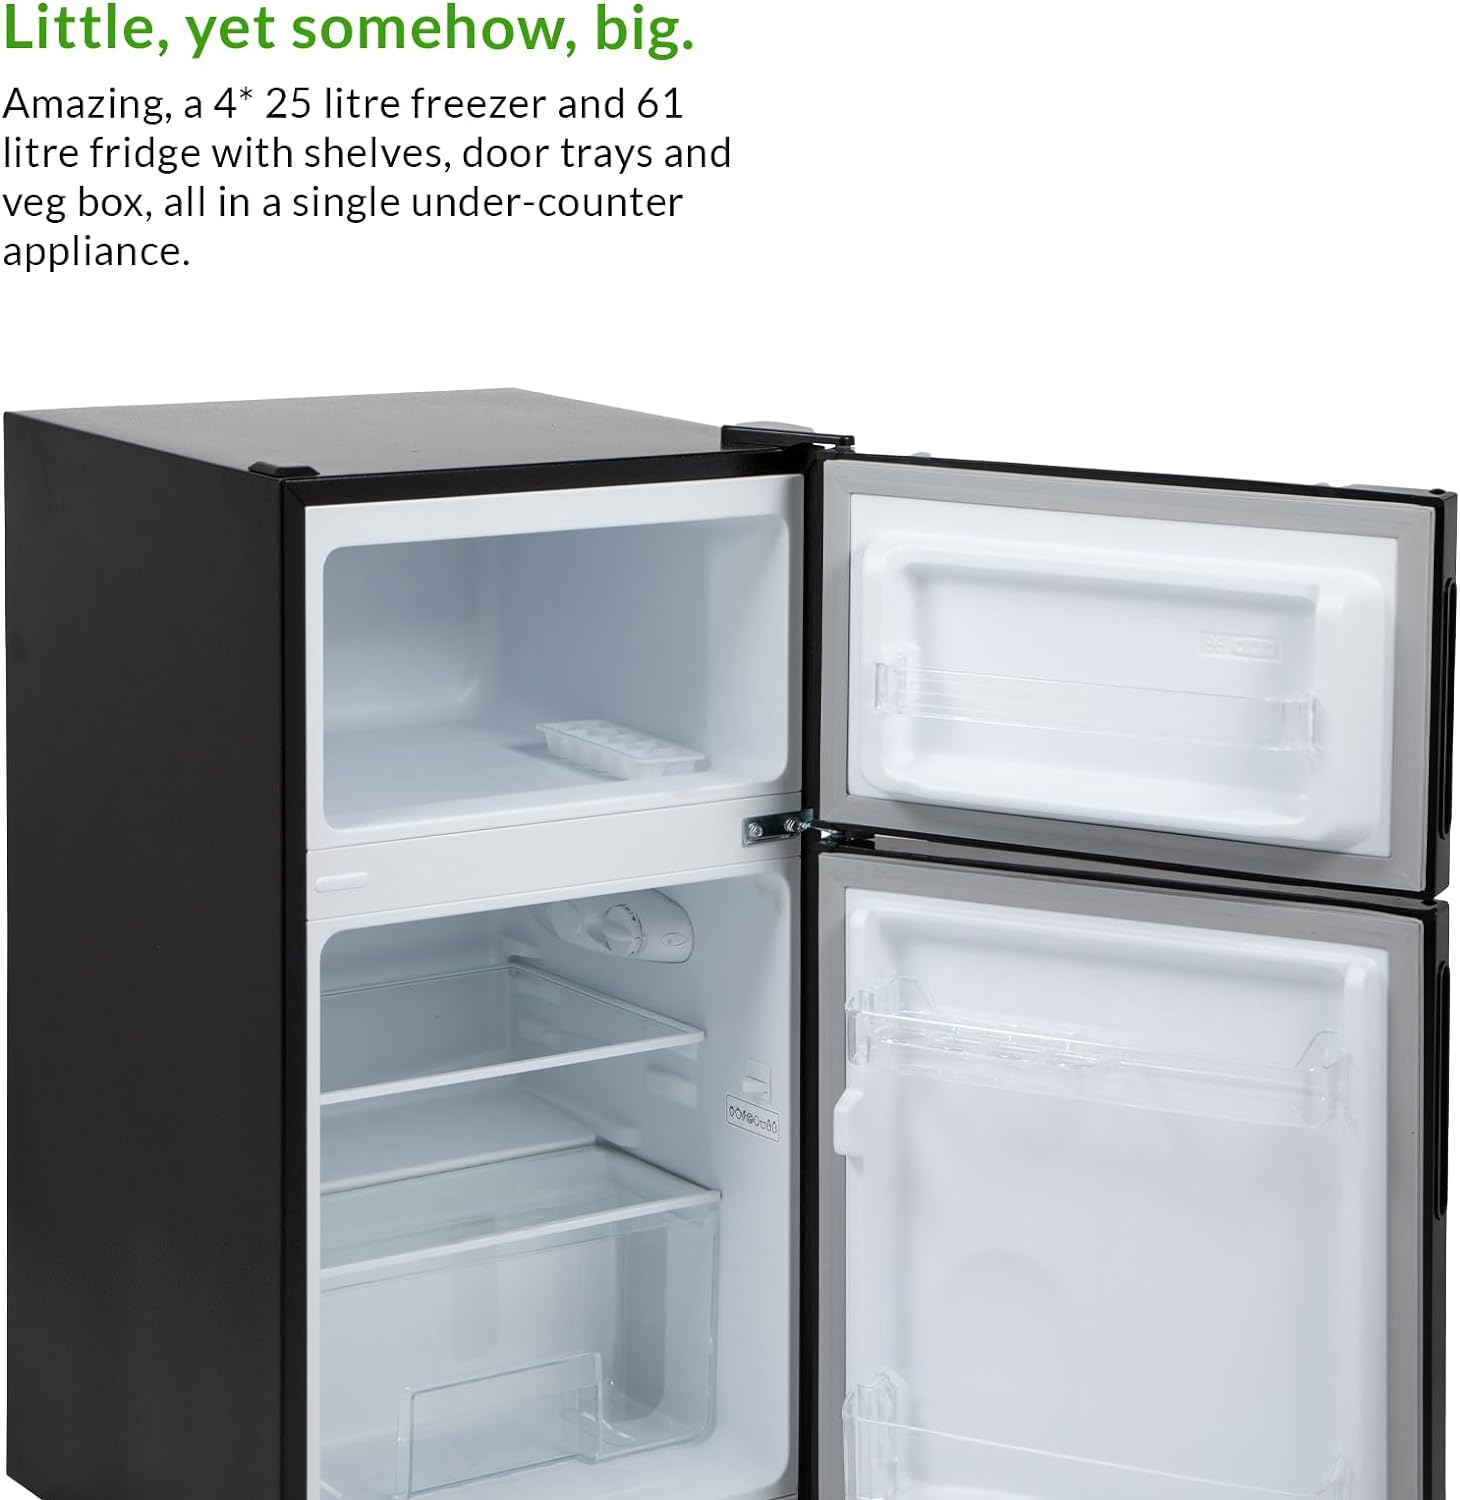 Willow WB50UCFF 86L Under Counter Fridge Freezer with 4* Freezer Rating, Adjustable Thermostat, Low Noise Level, 2 Years Warranty - Black - Amazing Gadgets Outlet